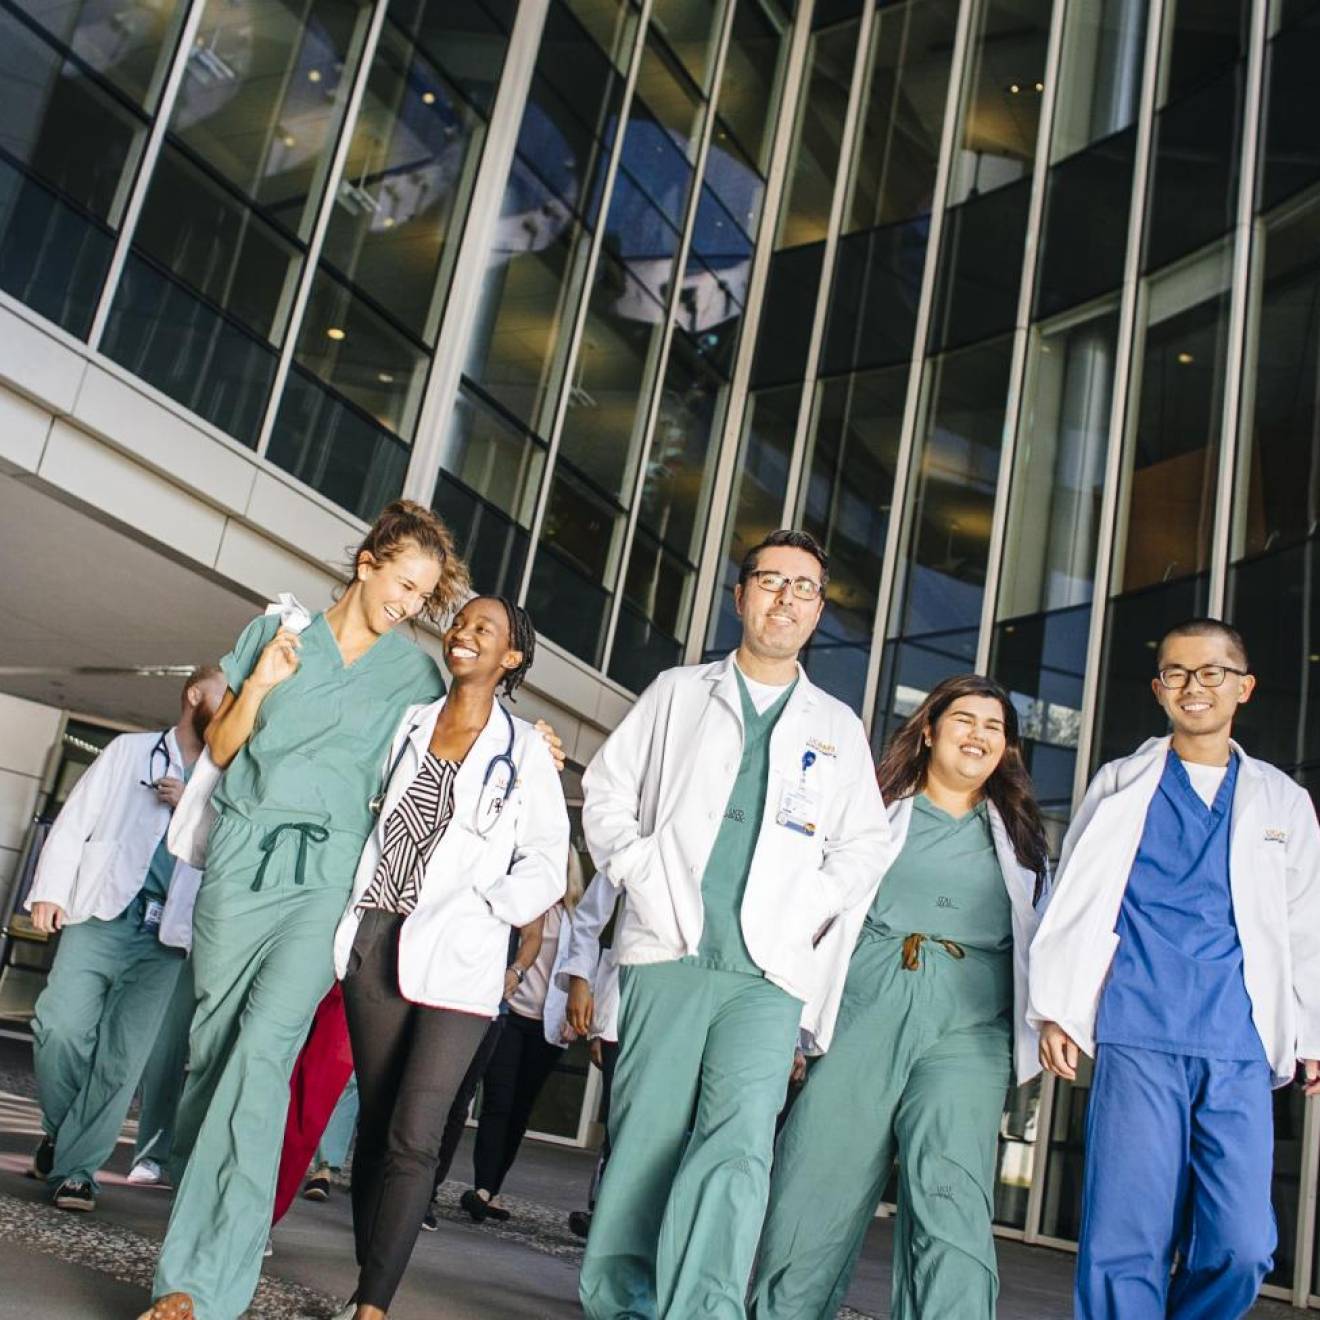 University of California Health students leaving a building together in scrubs